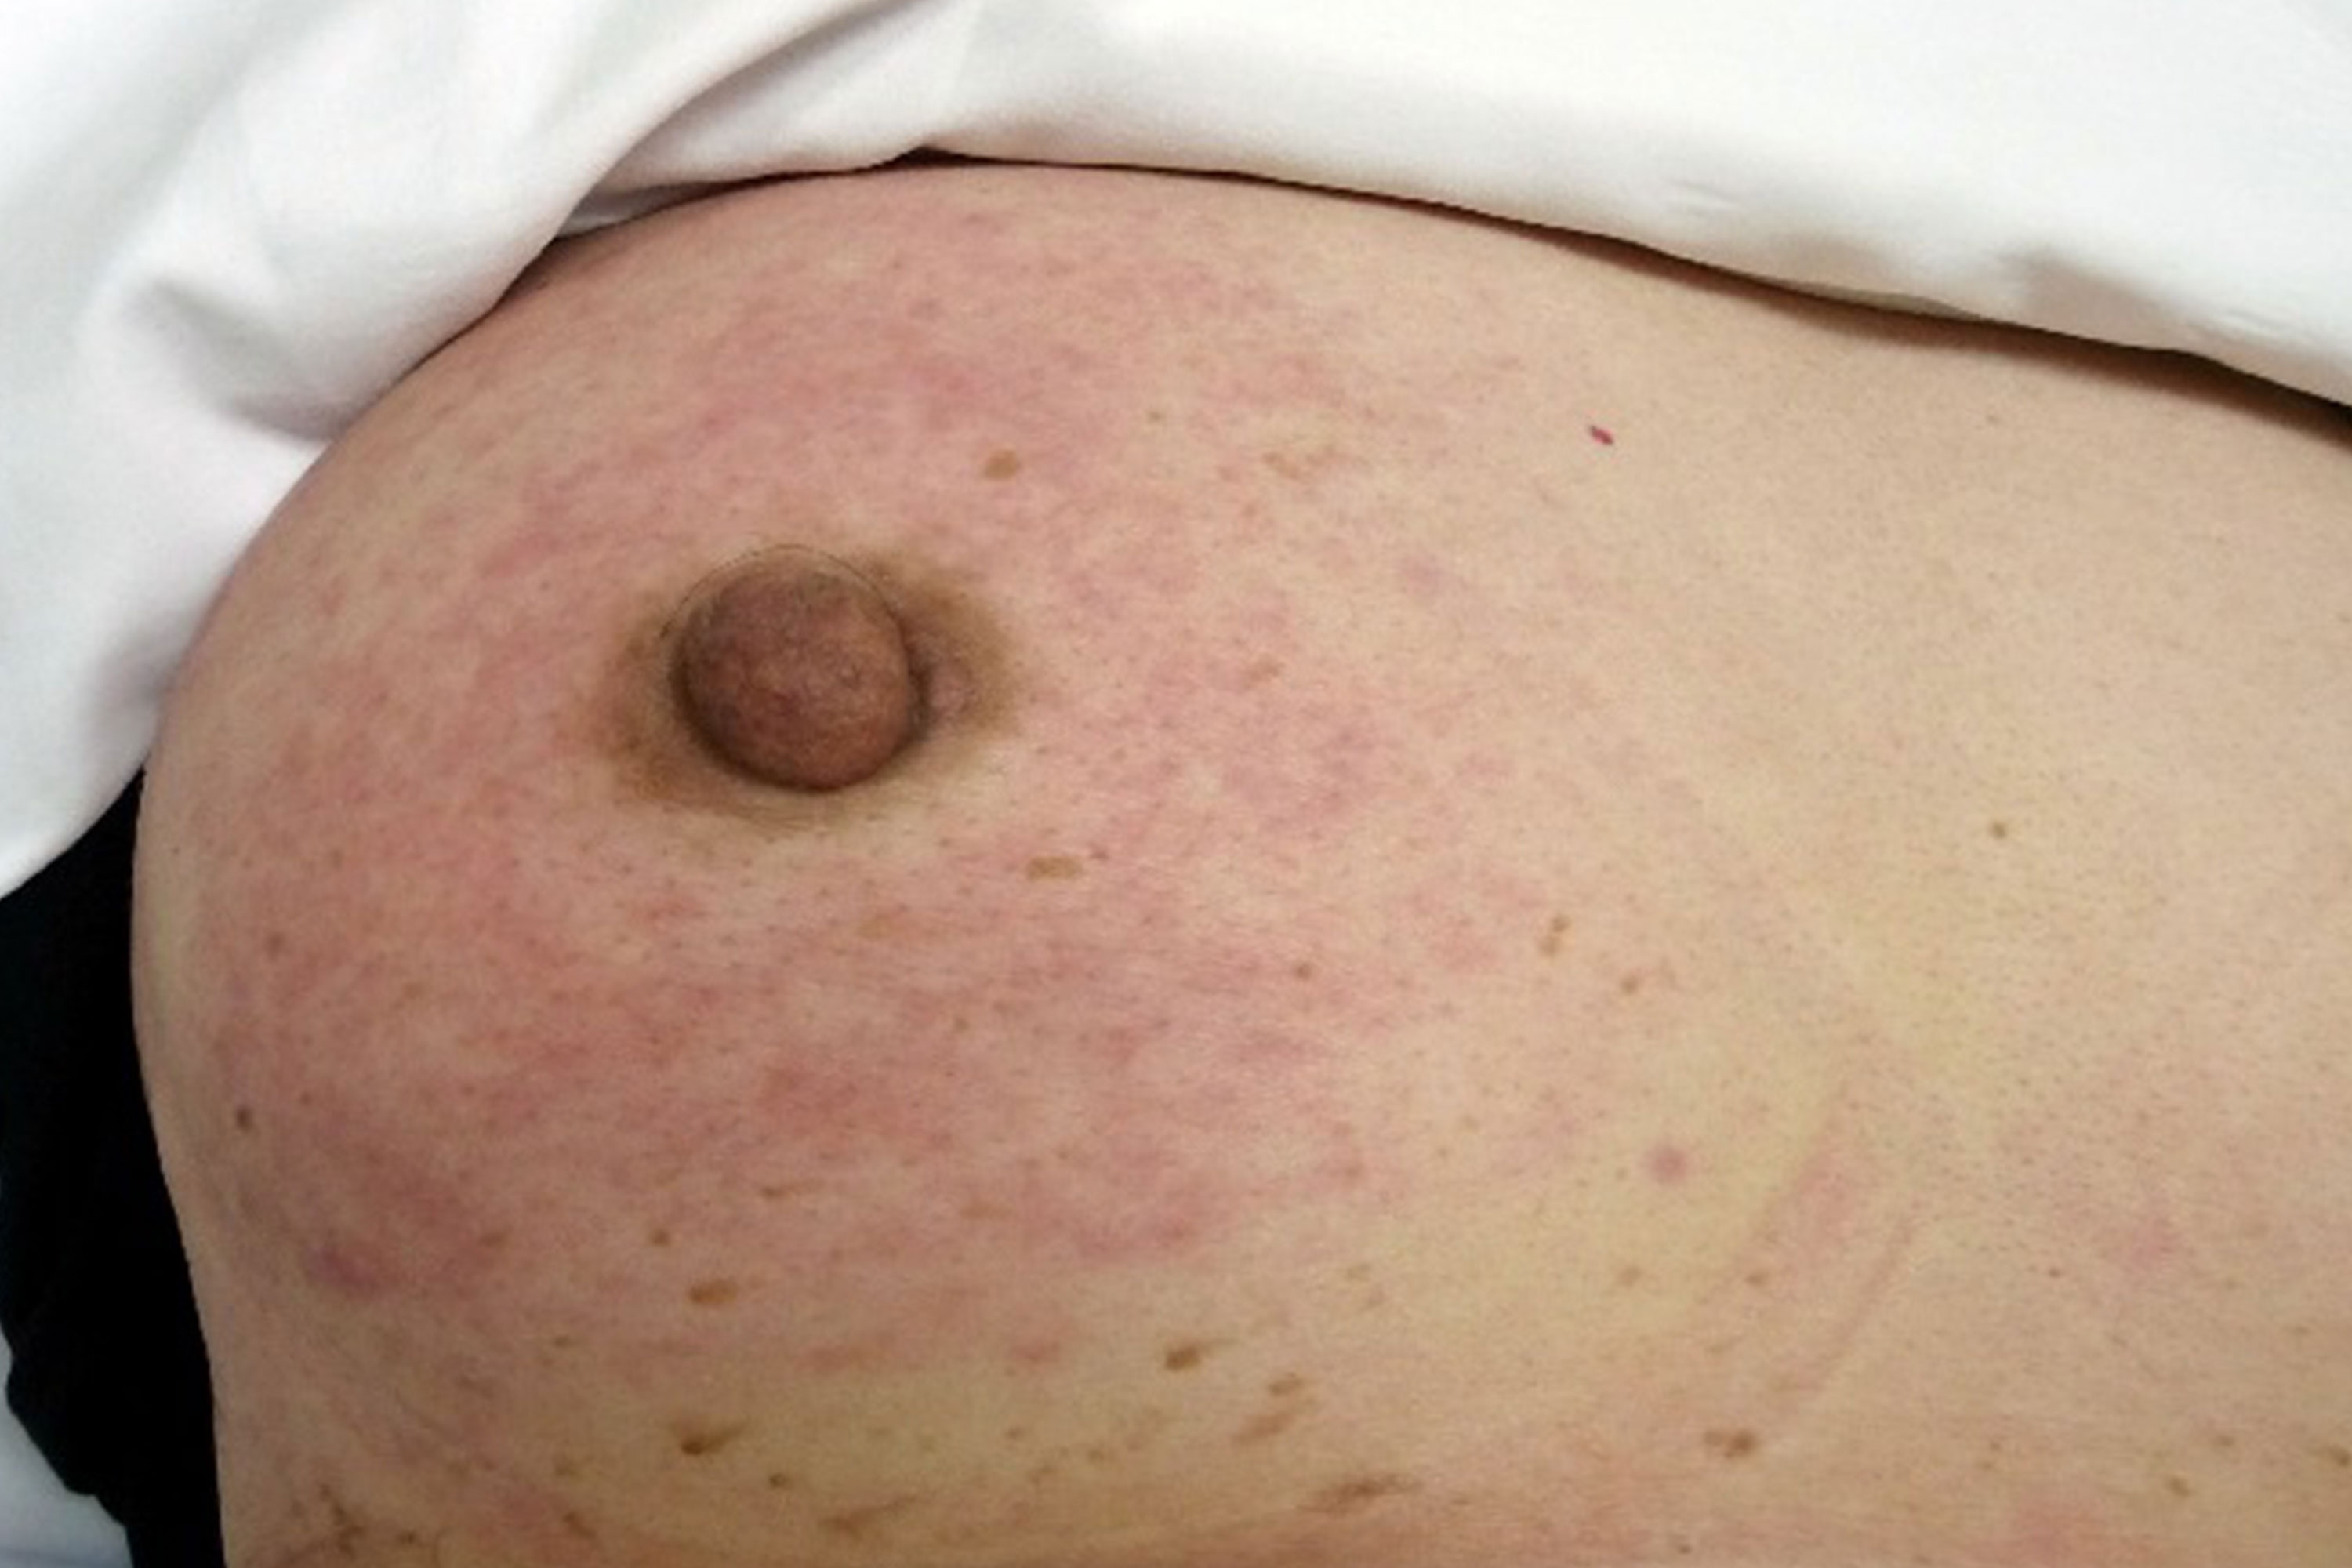 Skin diseases of the breast and nipple: Inflammatory and